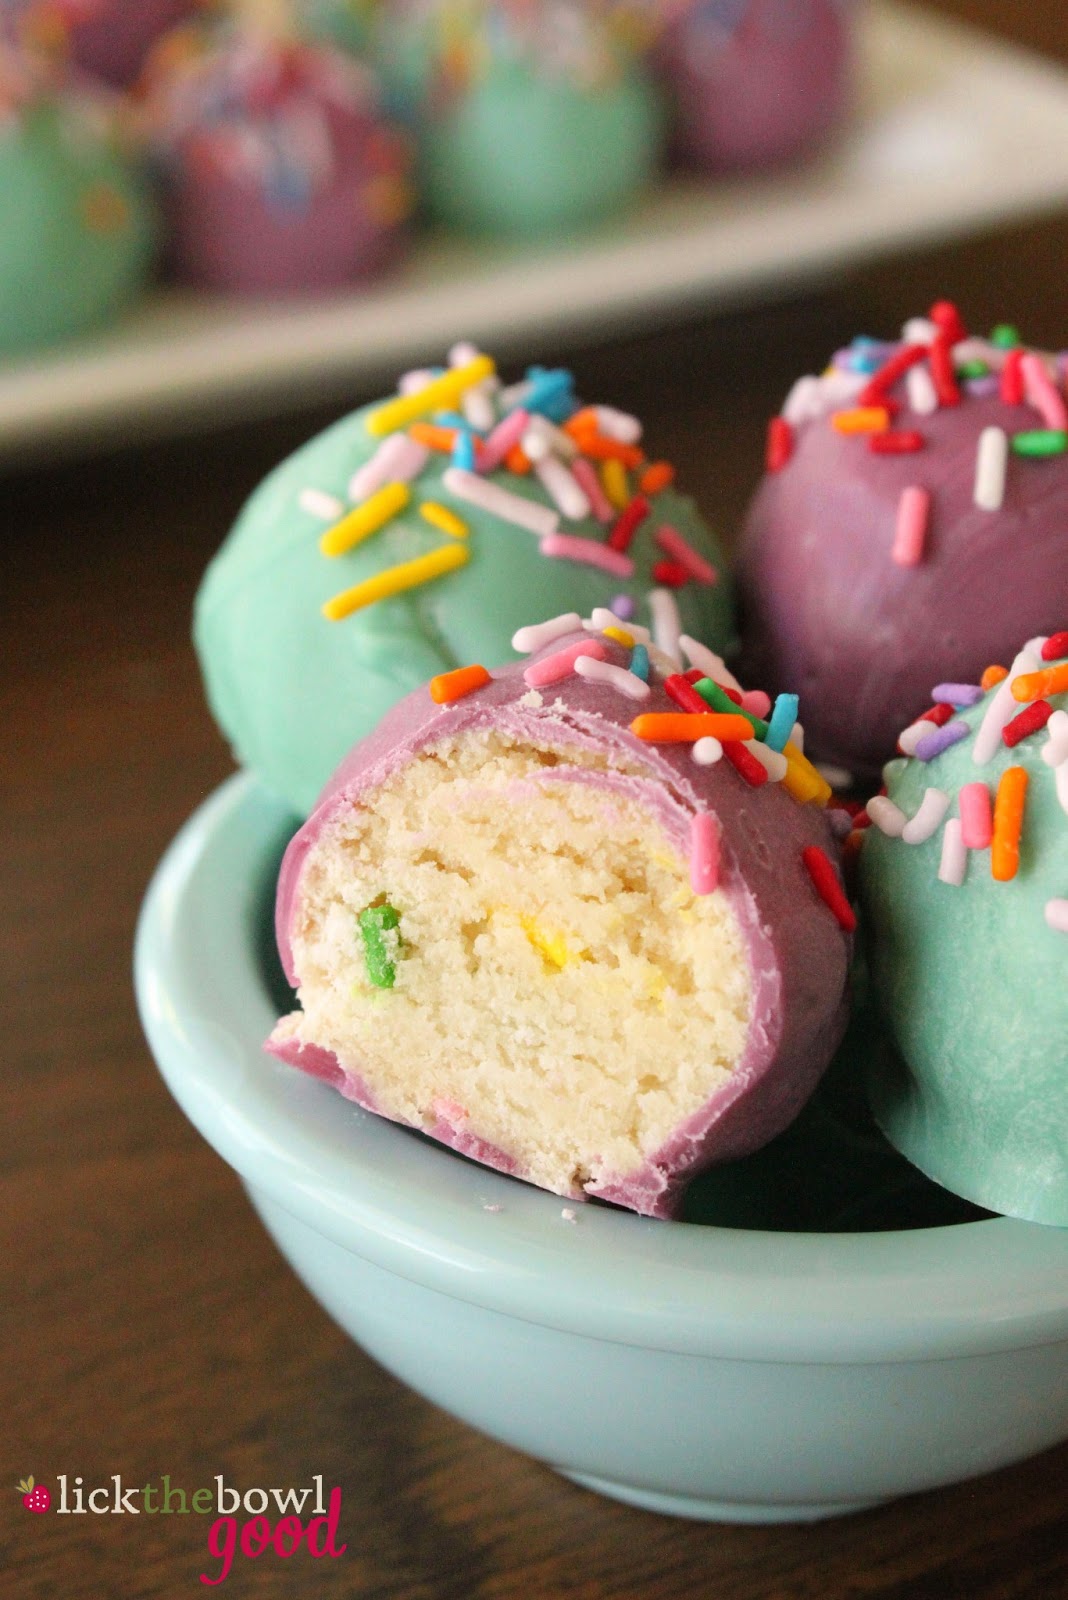 Lick The Bowl Good: My Birthday Cakes and No-Bake Cake Pops